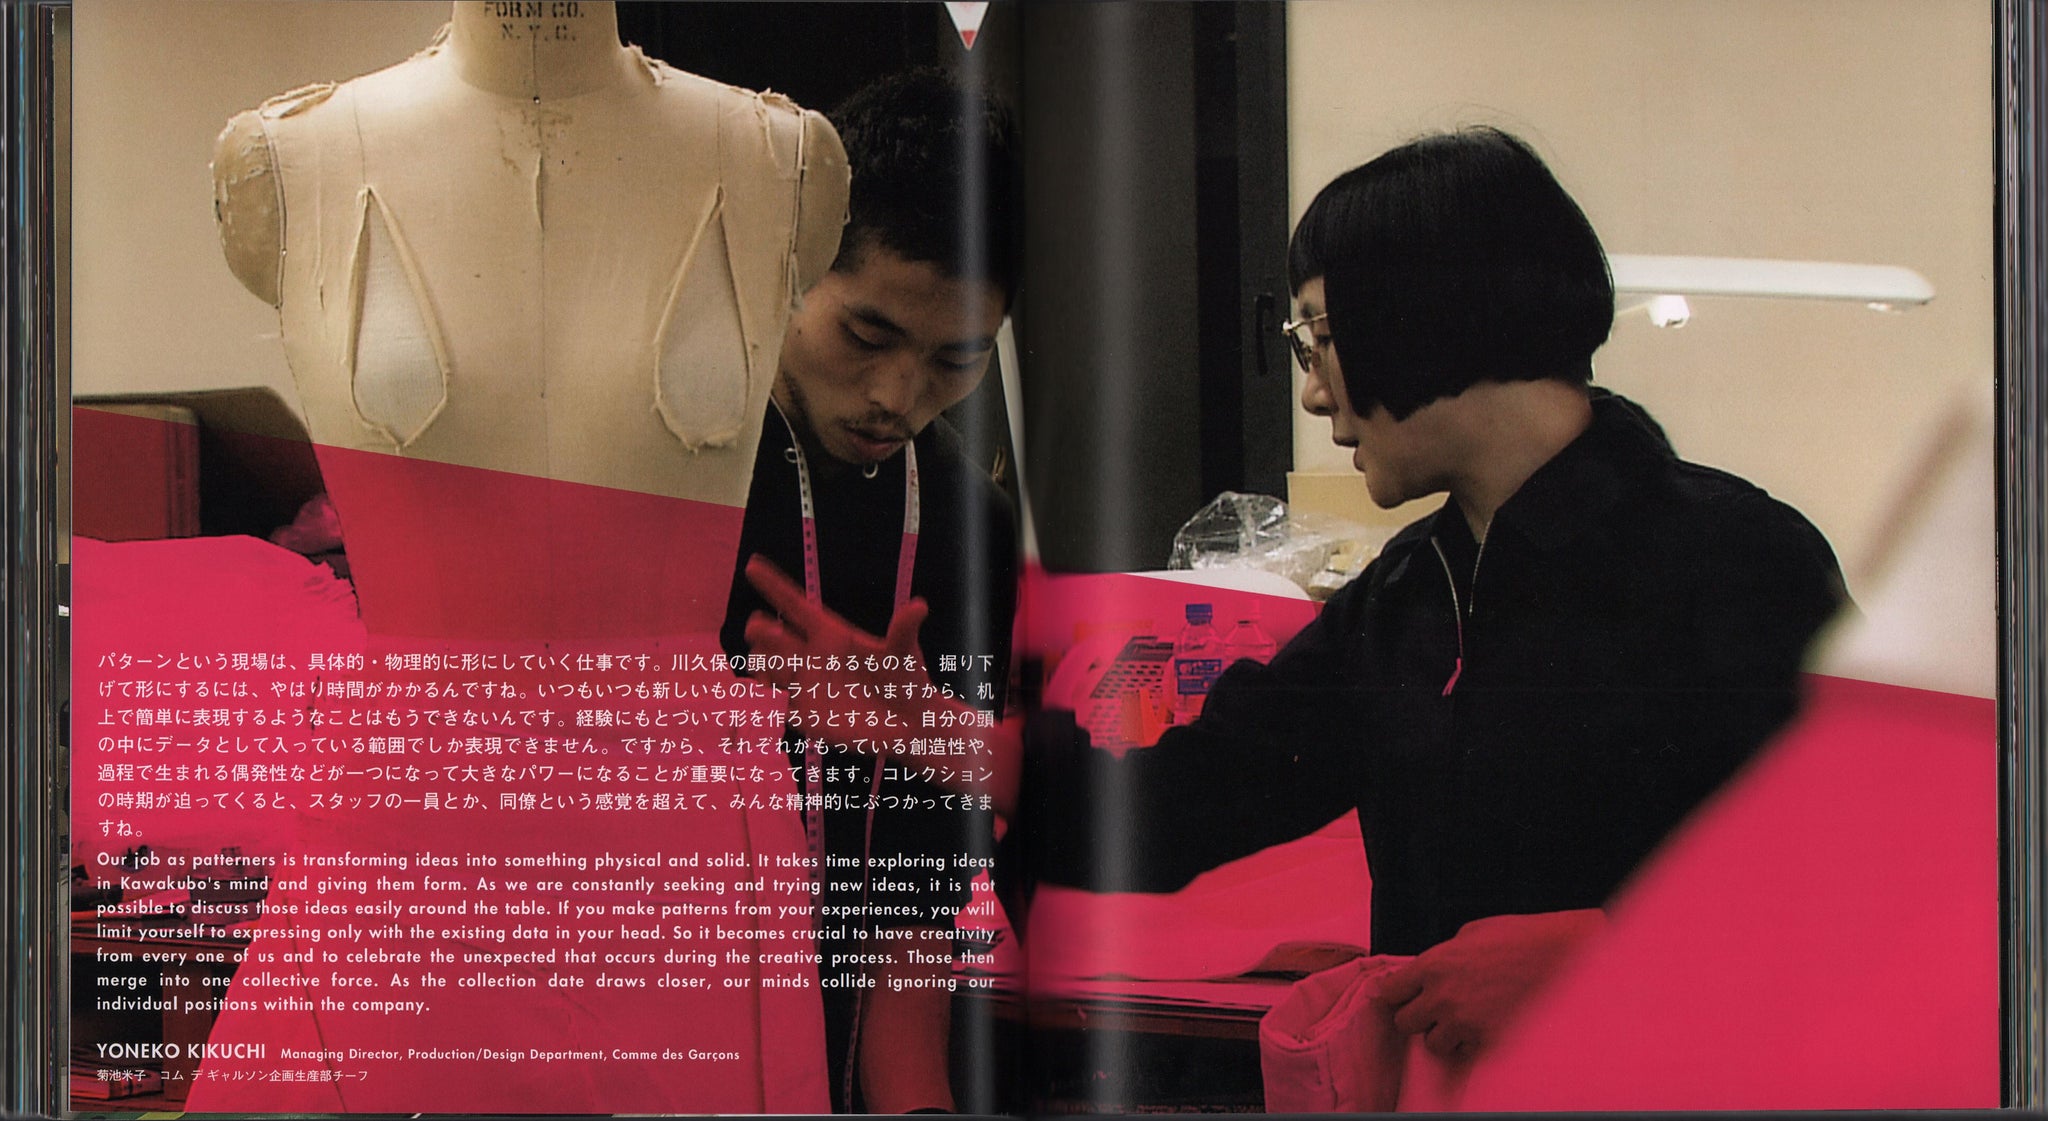 Unlimited: Comme des Garcons (2005) - edited by Sanae Shimizu and NHK